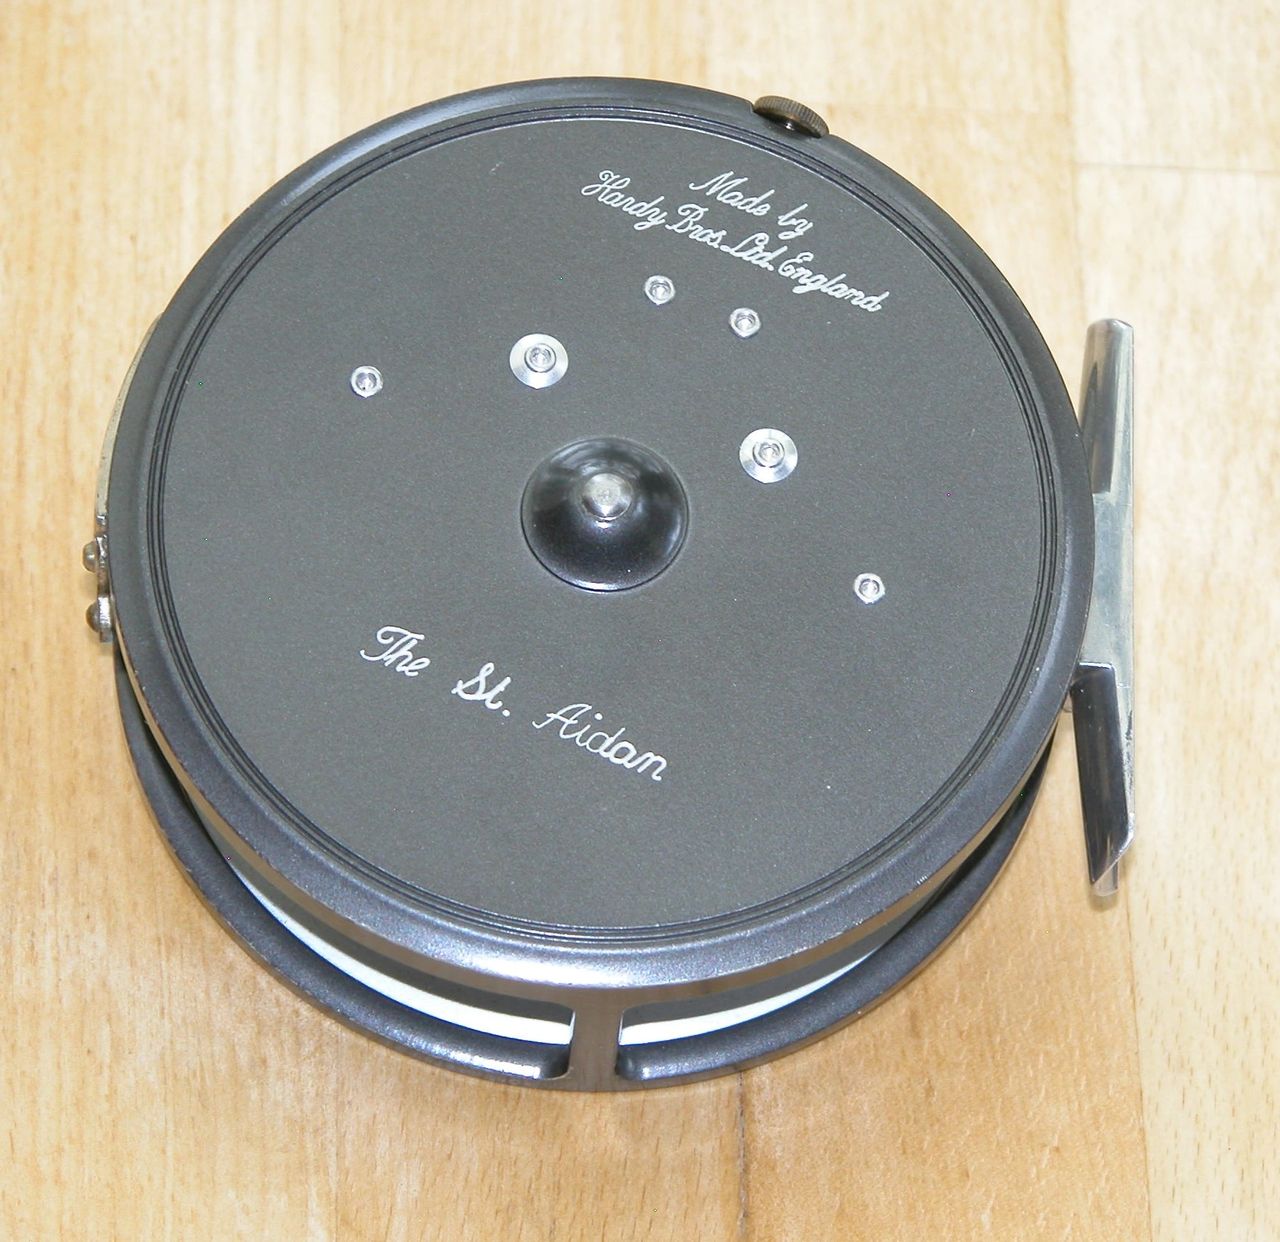 Dating a post war JW Young reel, Classic Fly Reels